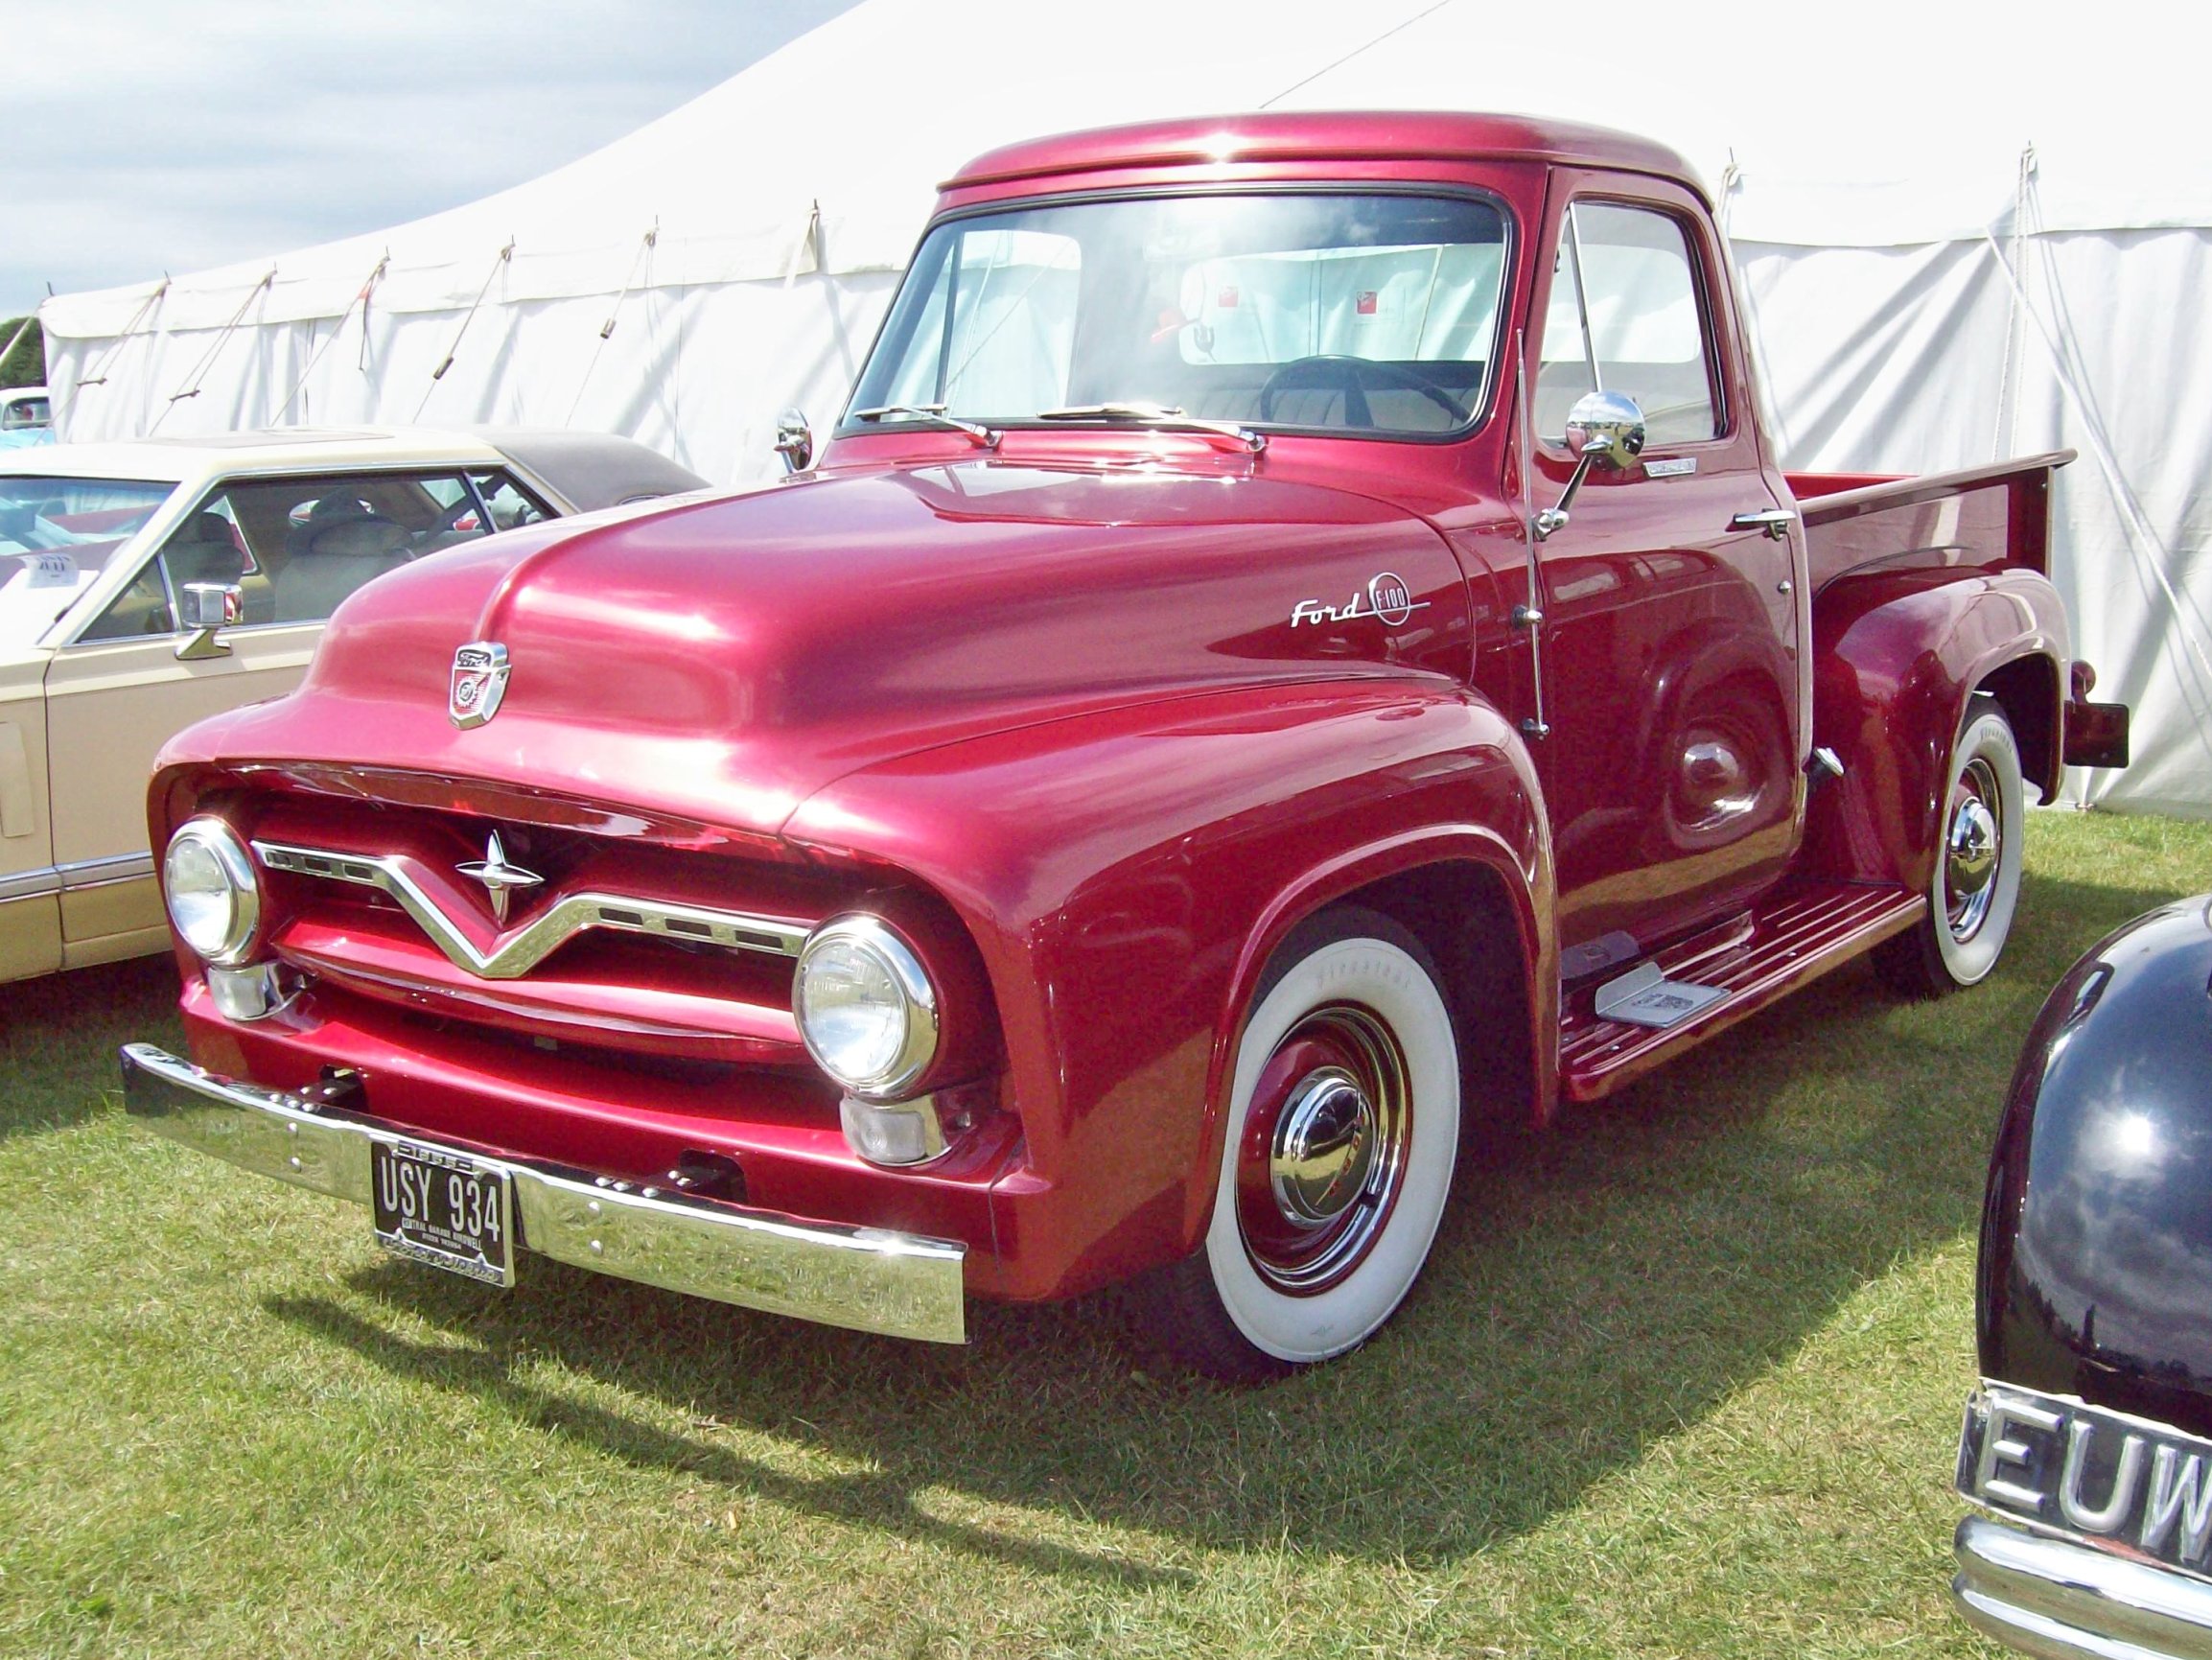 154 Ford F100 Pick Up 2nd Generation (1955) | Flickr - Photo Sharing!